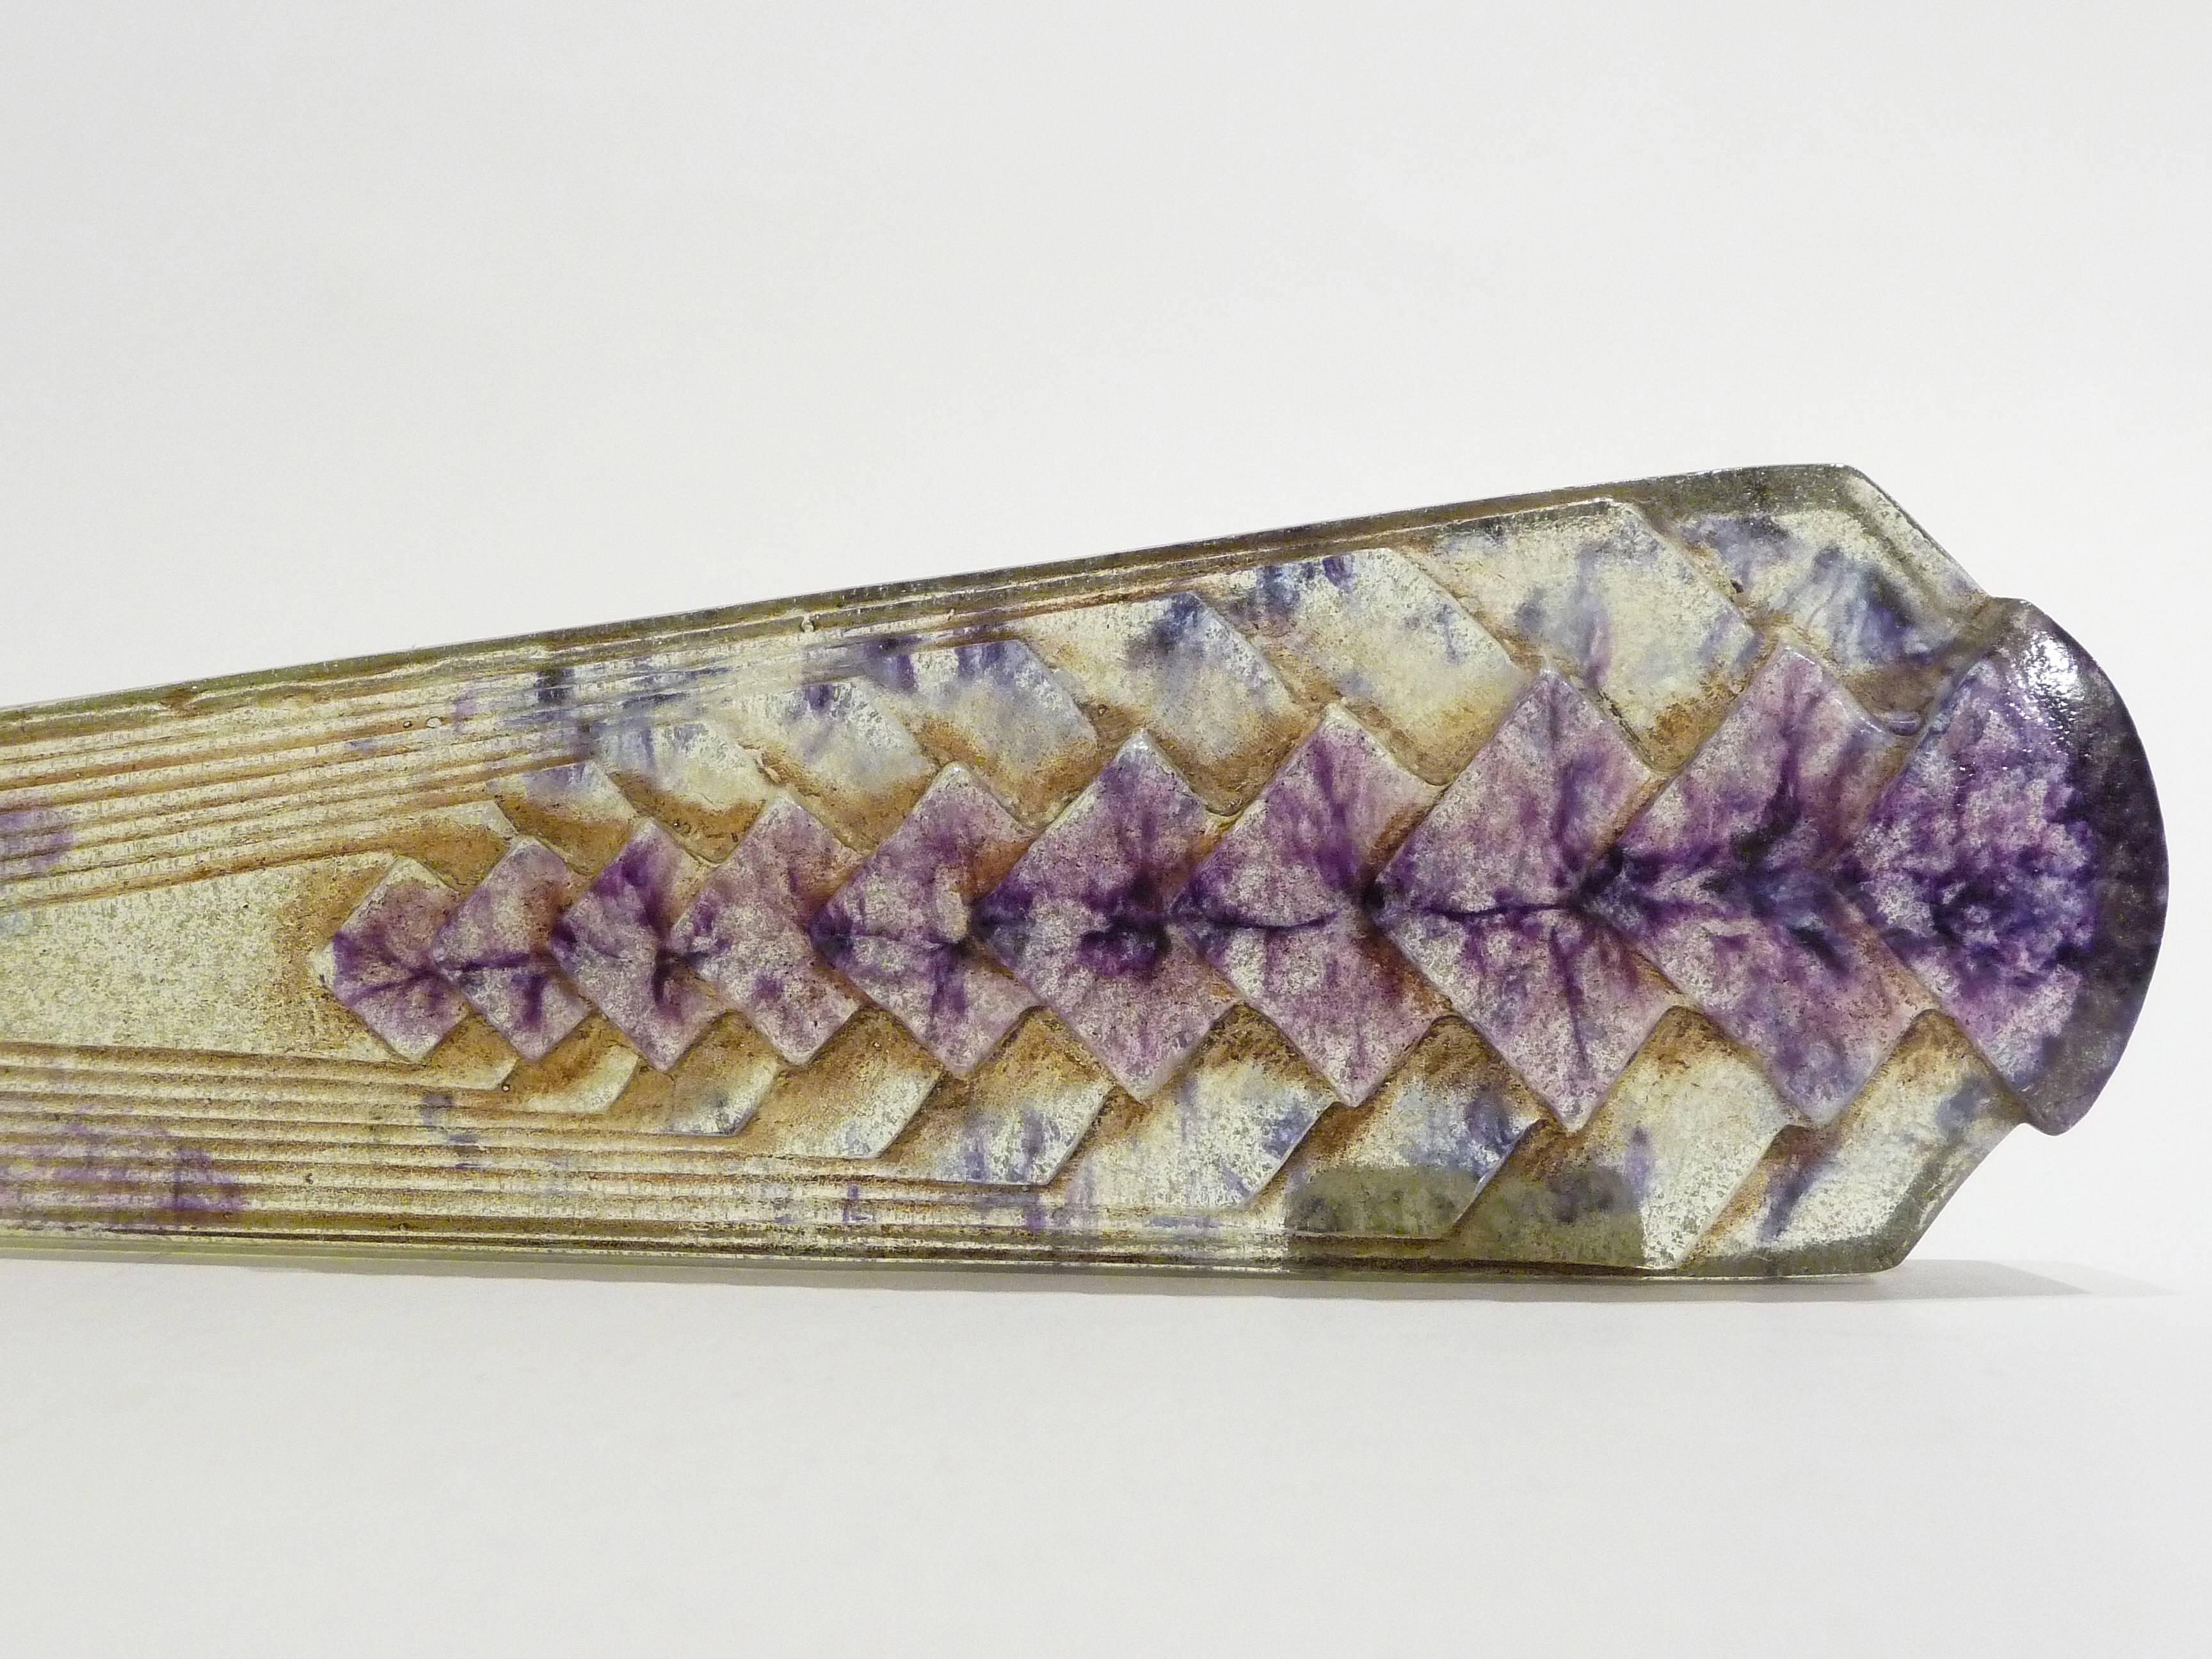 Gabriel-Argy Rousseau.
A pâte de verre letter-opener with purple inclusions and geometrical patterns in relief
signed.